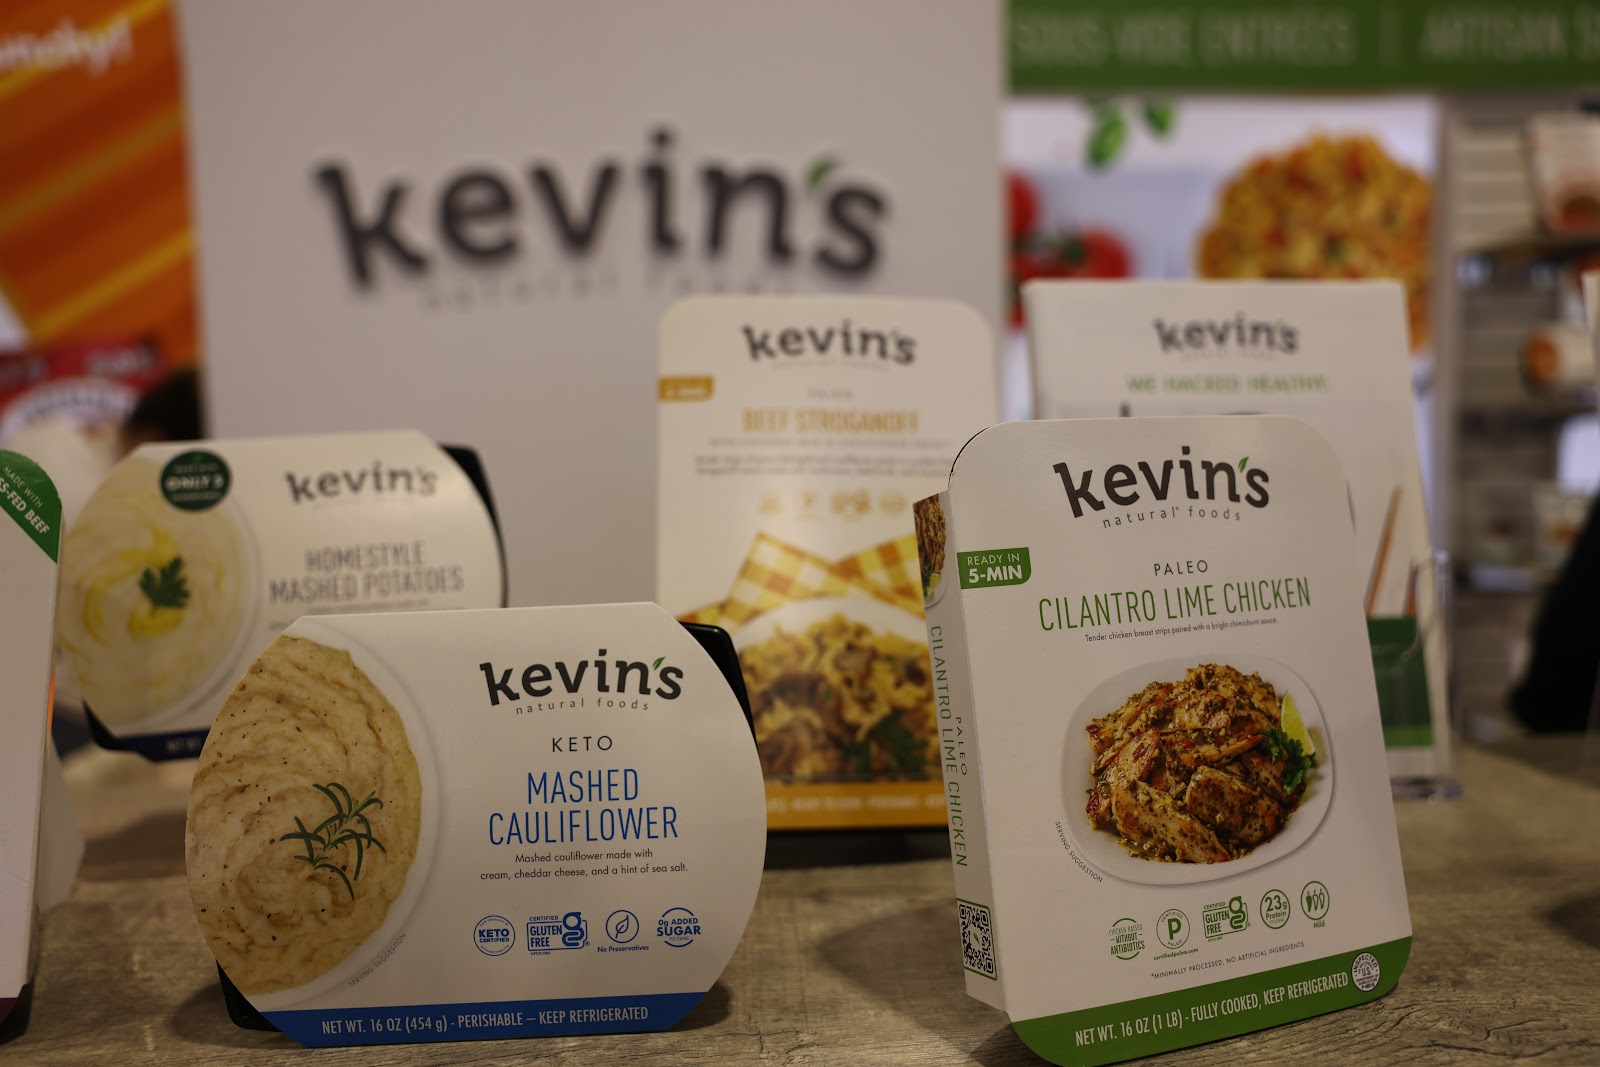 Kevin's natural foods samples at expo east 2022